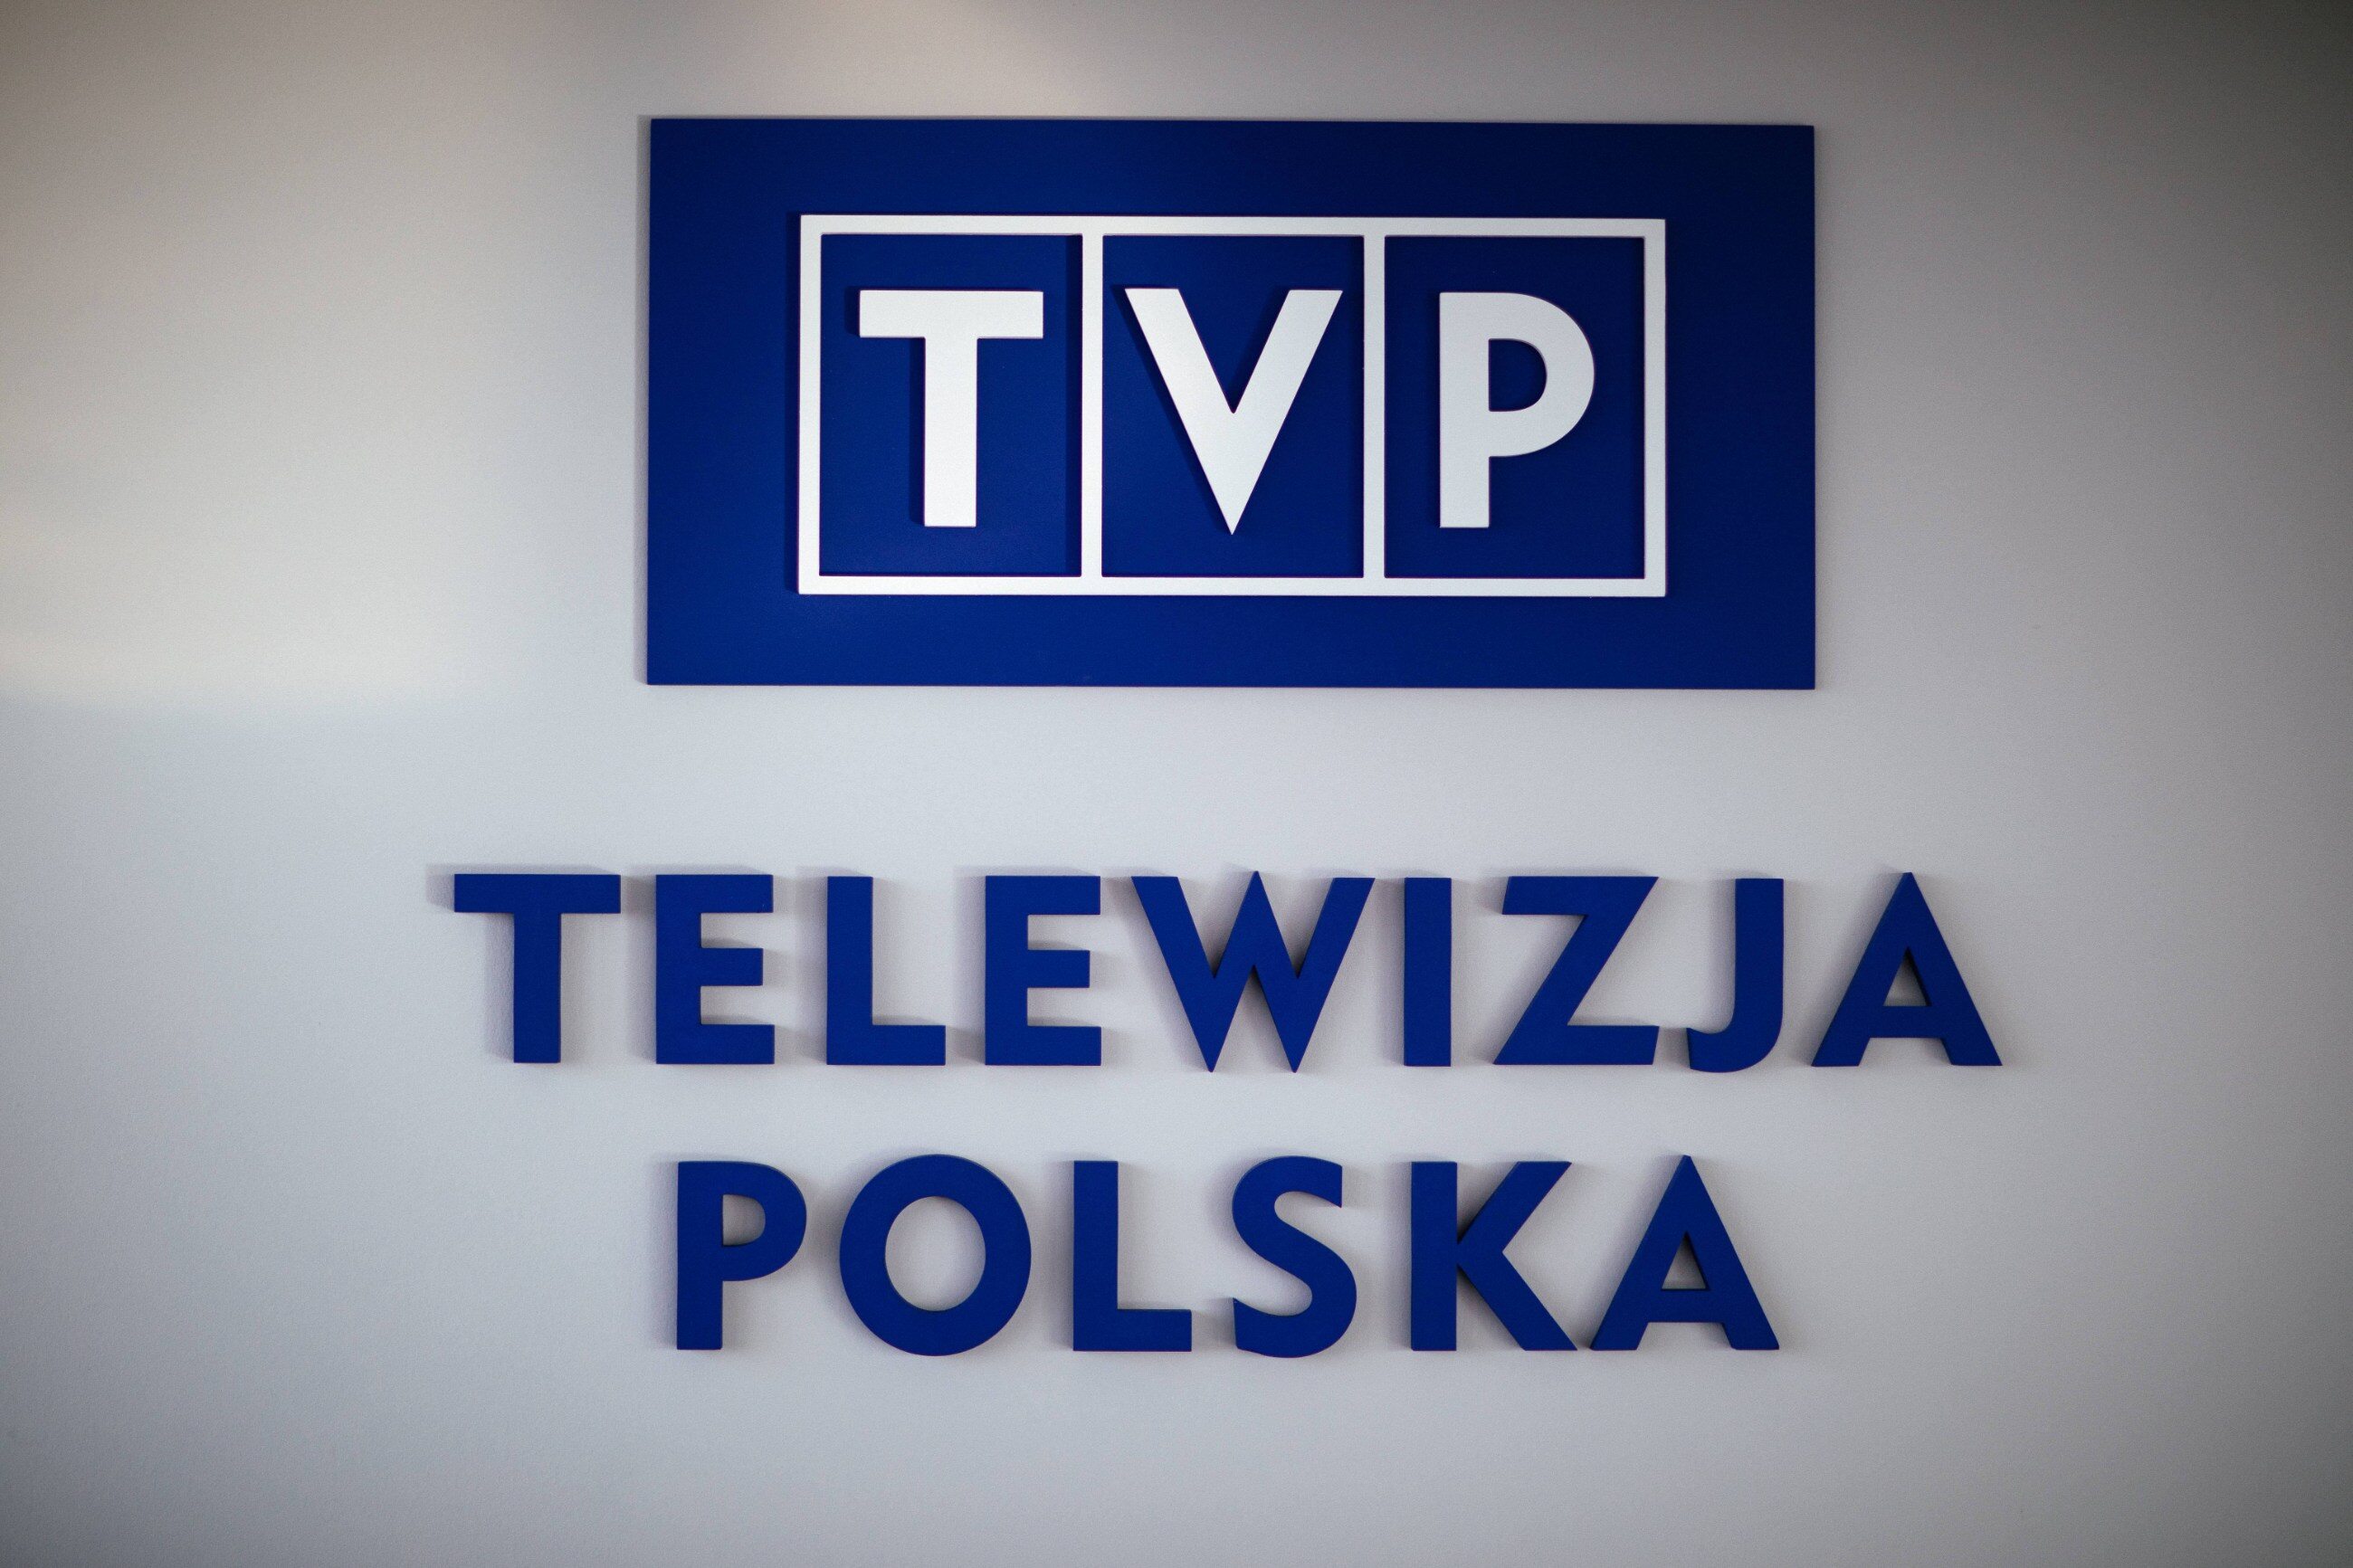 TVP.  “List of banned films”.  There are 17 productions